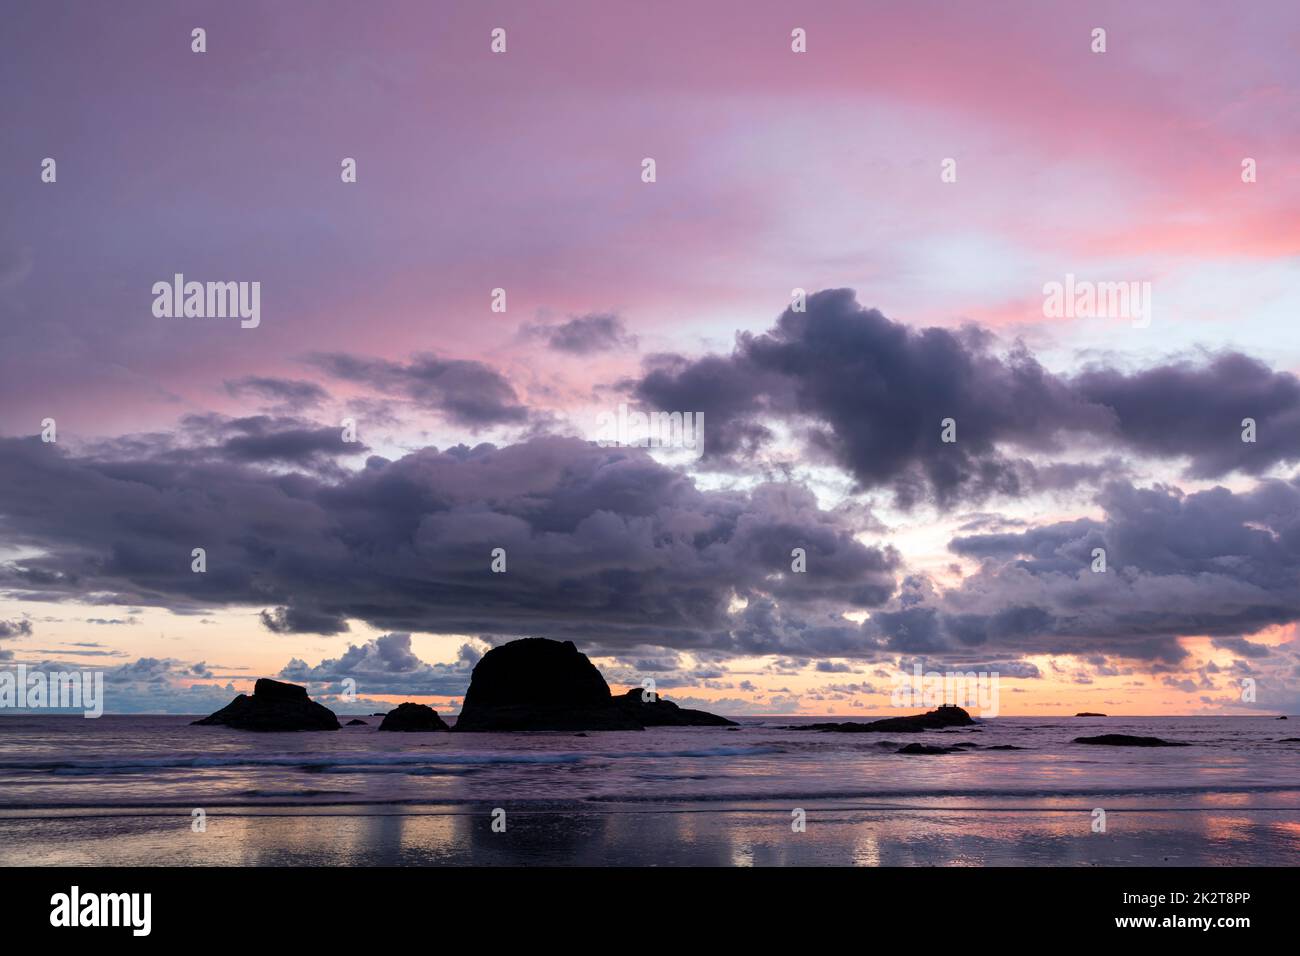 WA22058-00...WASINGTON - Dusk at Ruby Beach on the Pacific Coast in Olympic National Park. Stock Photo